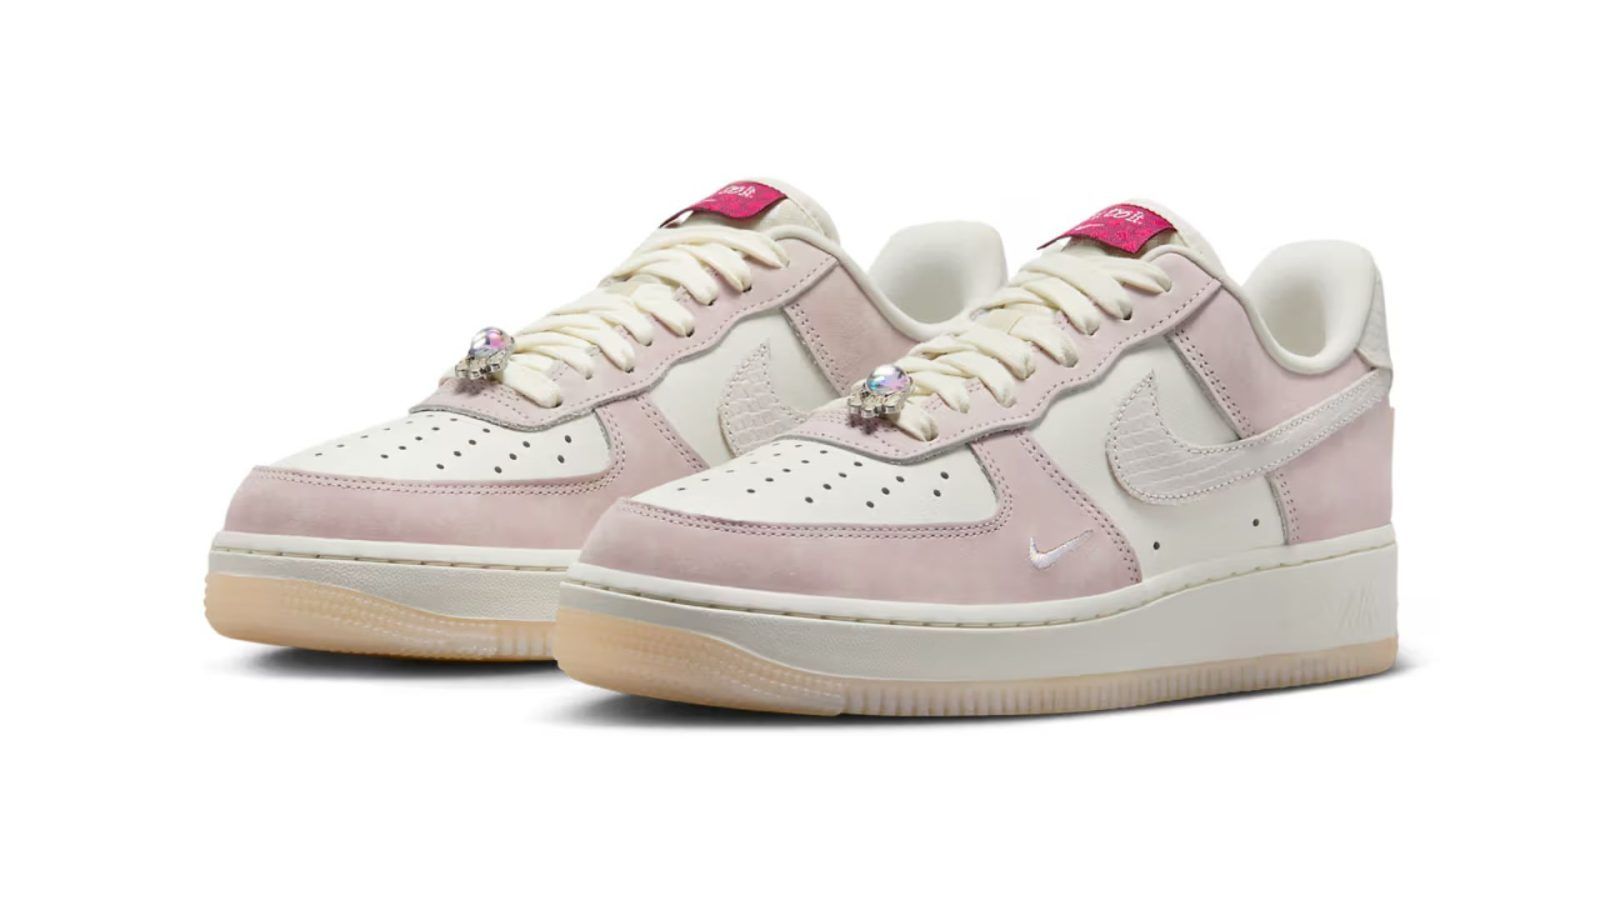 Nike Air Force 1 - Official 2023 Release Dates